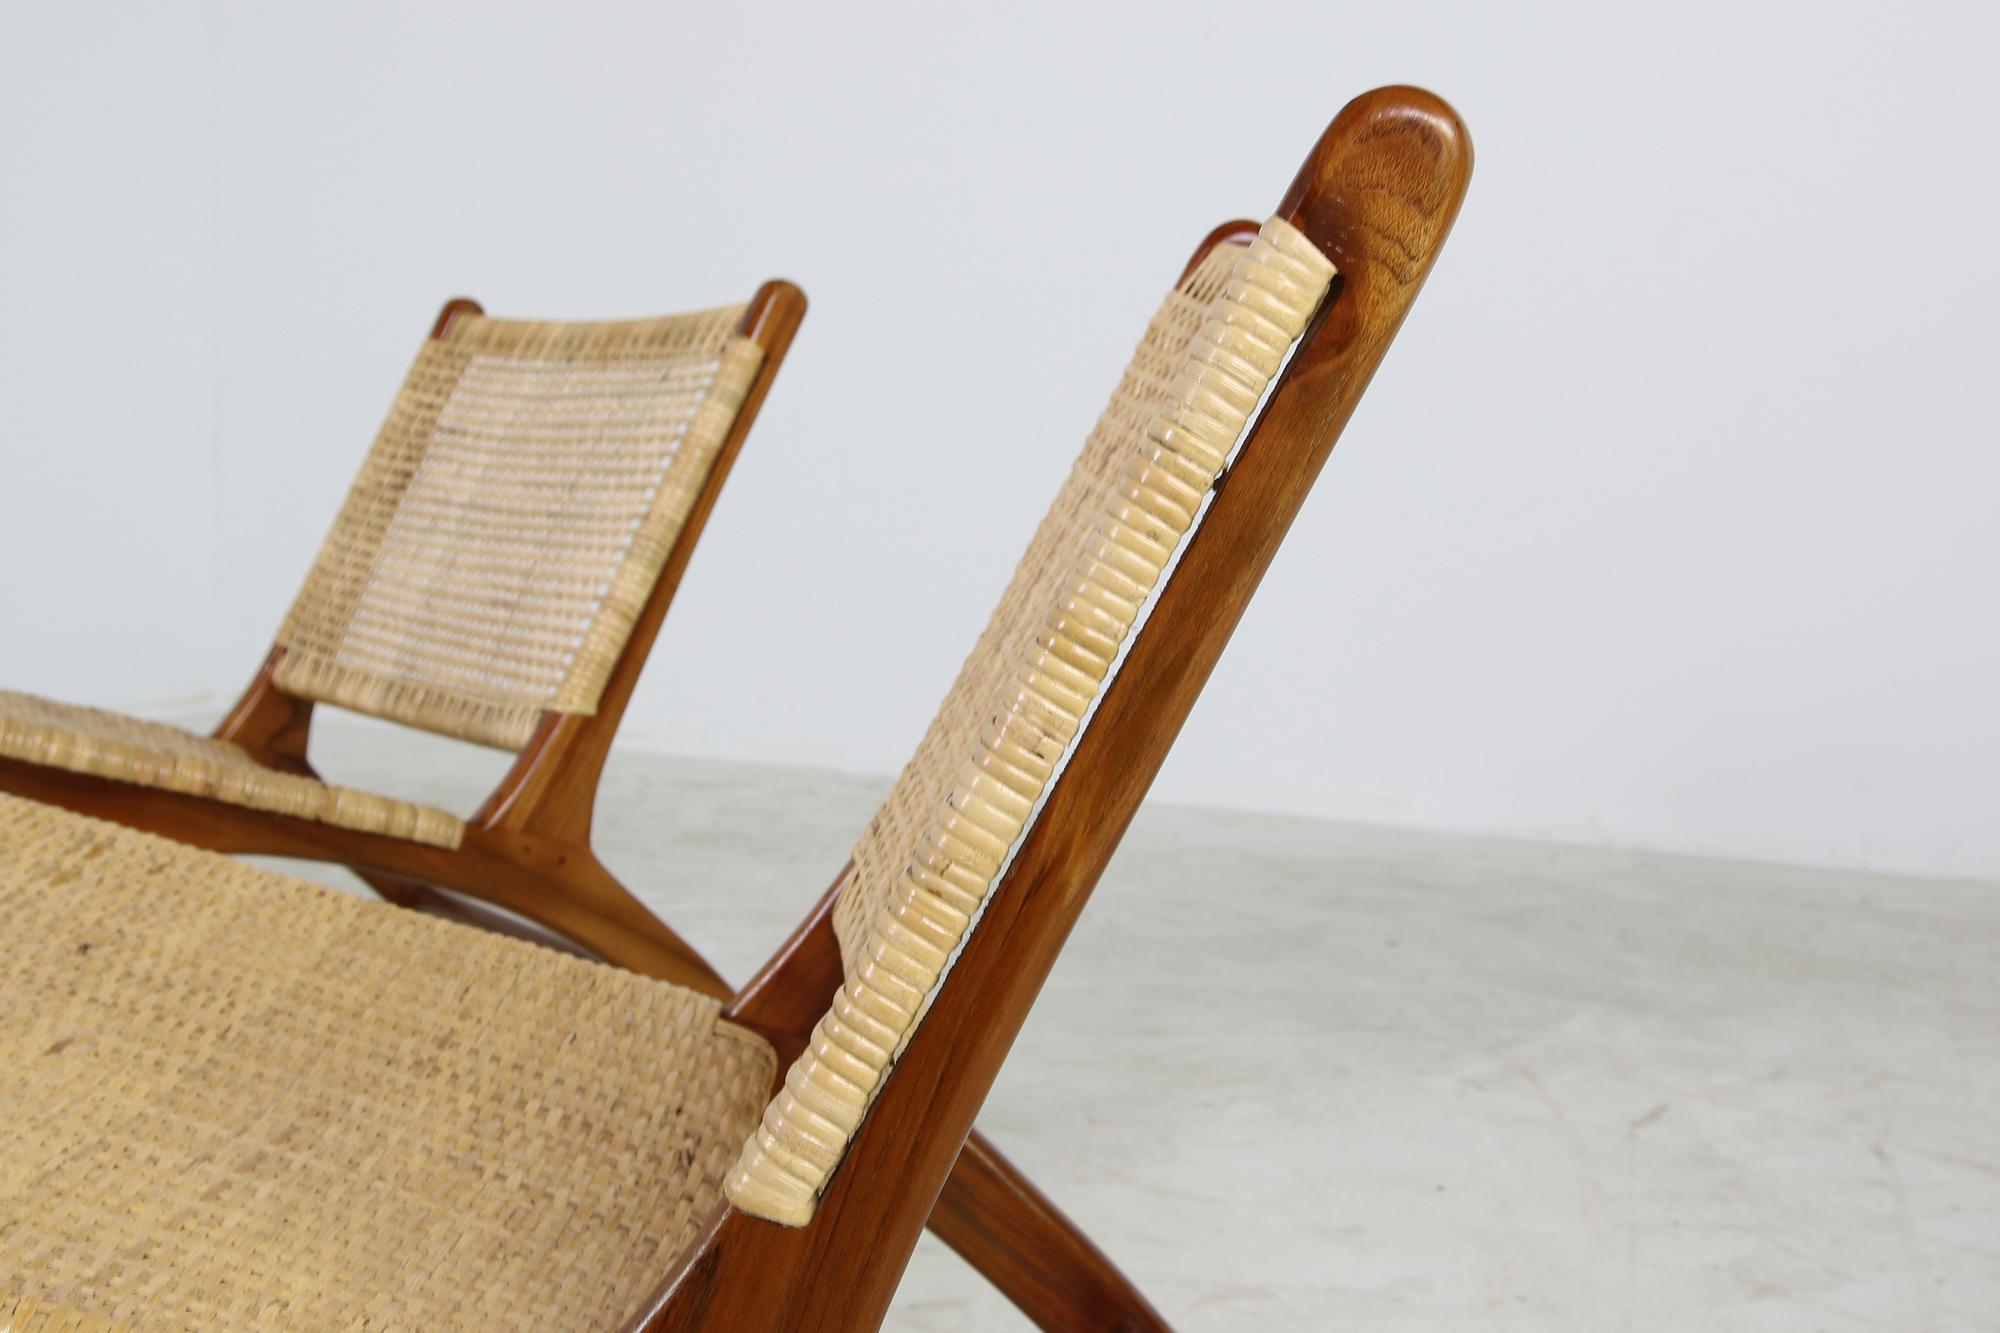 Mid-Century Modern Pair of Solid Teak and Cane Lounge Chairs, Brazilian & Midcentury Style, Modern